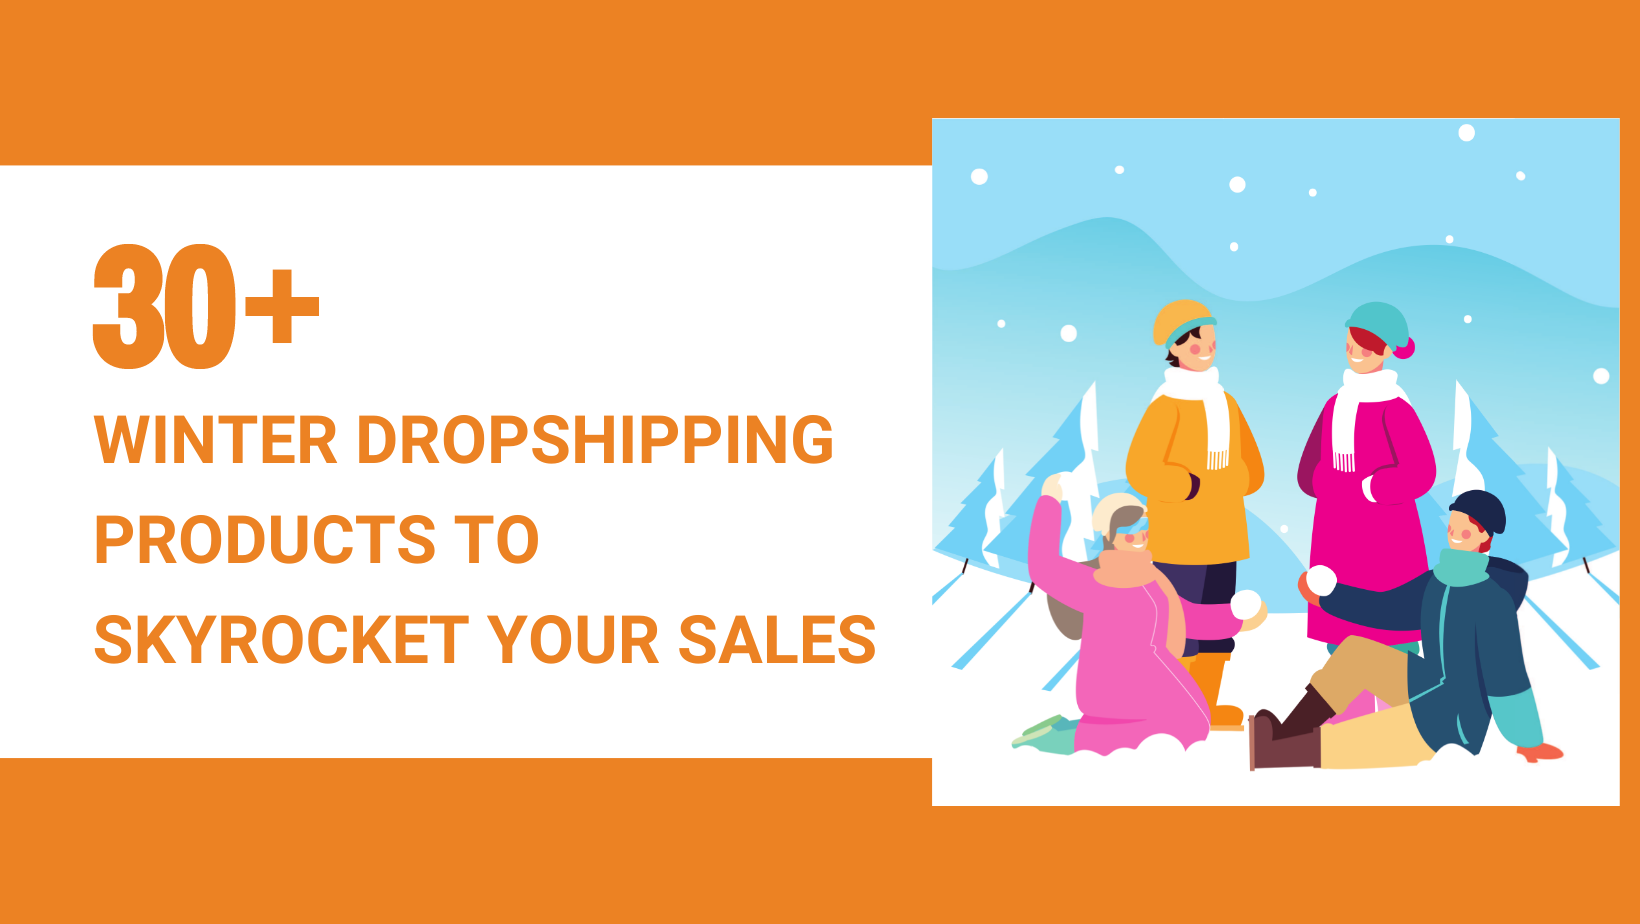 30+ WINTER DROPSHIPPING PRODUCTS TO SKYROCKET YOUR SALES